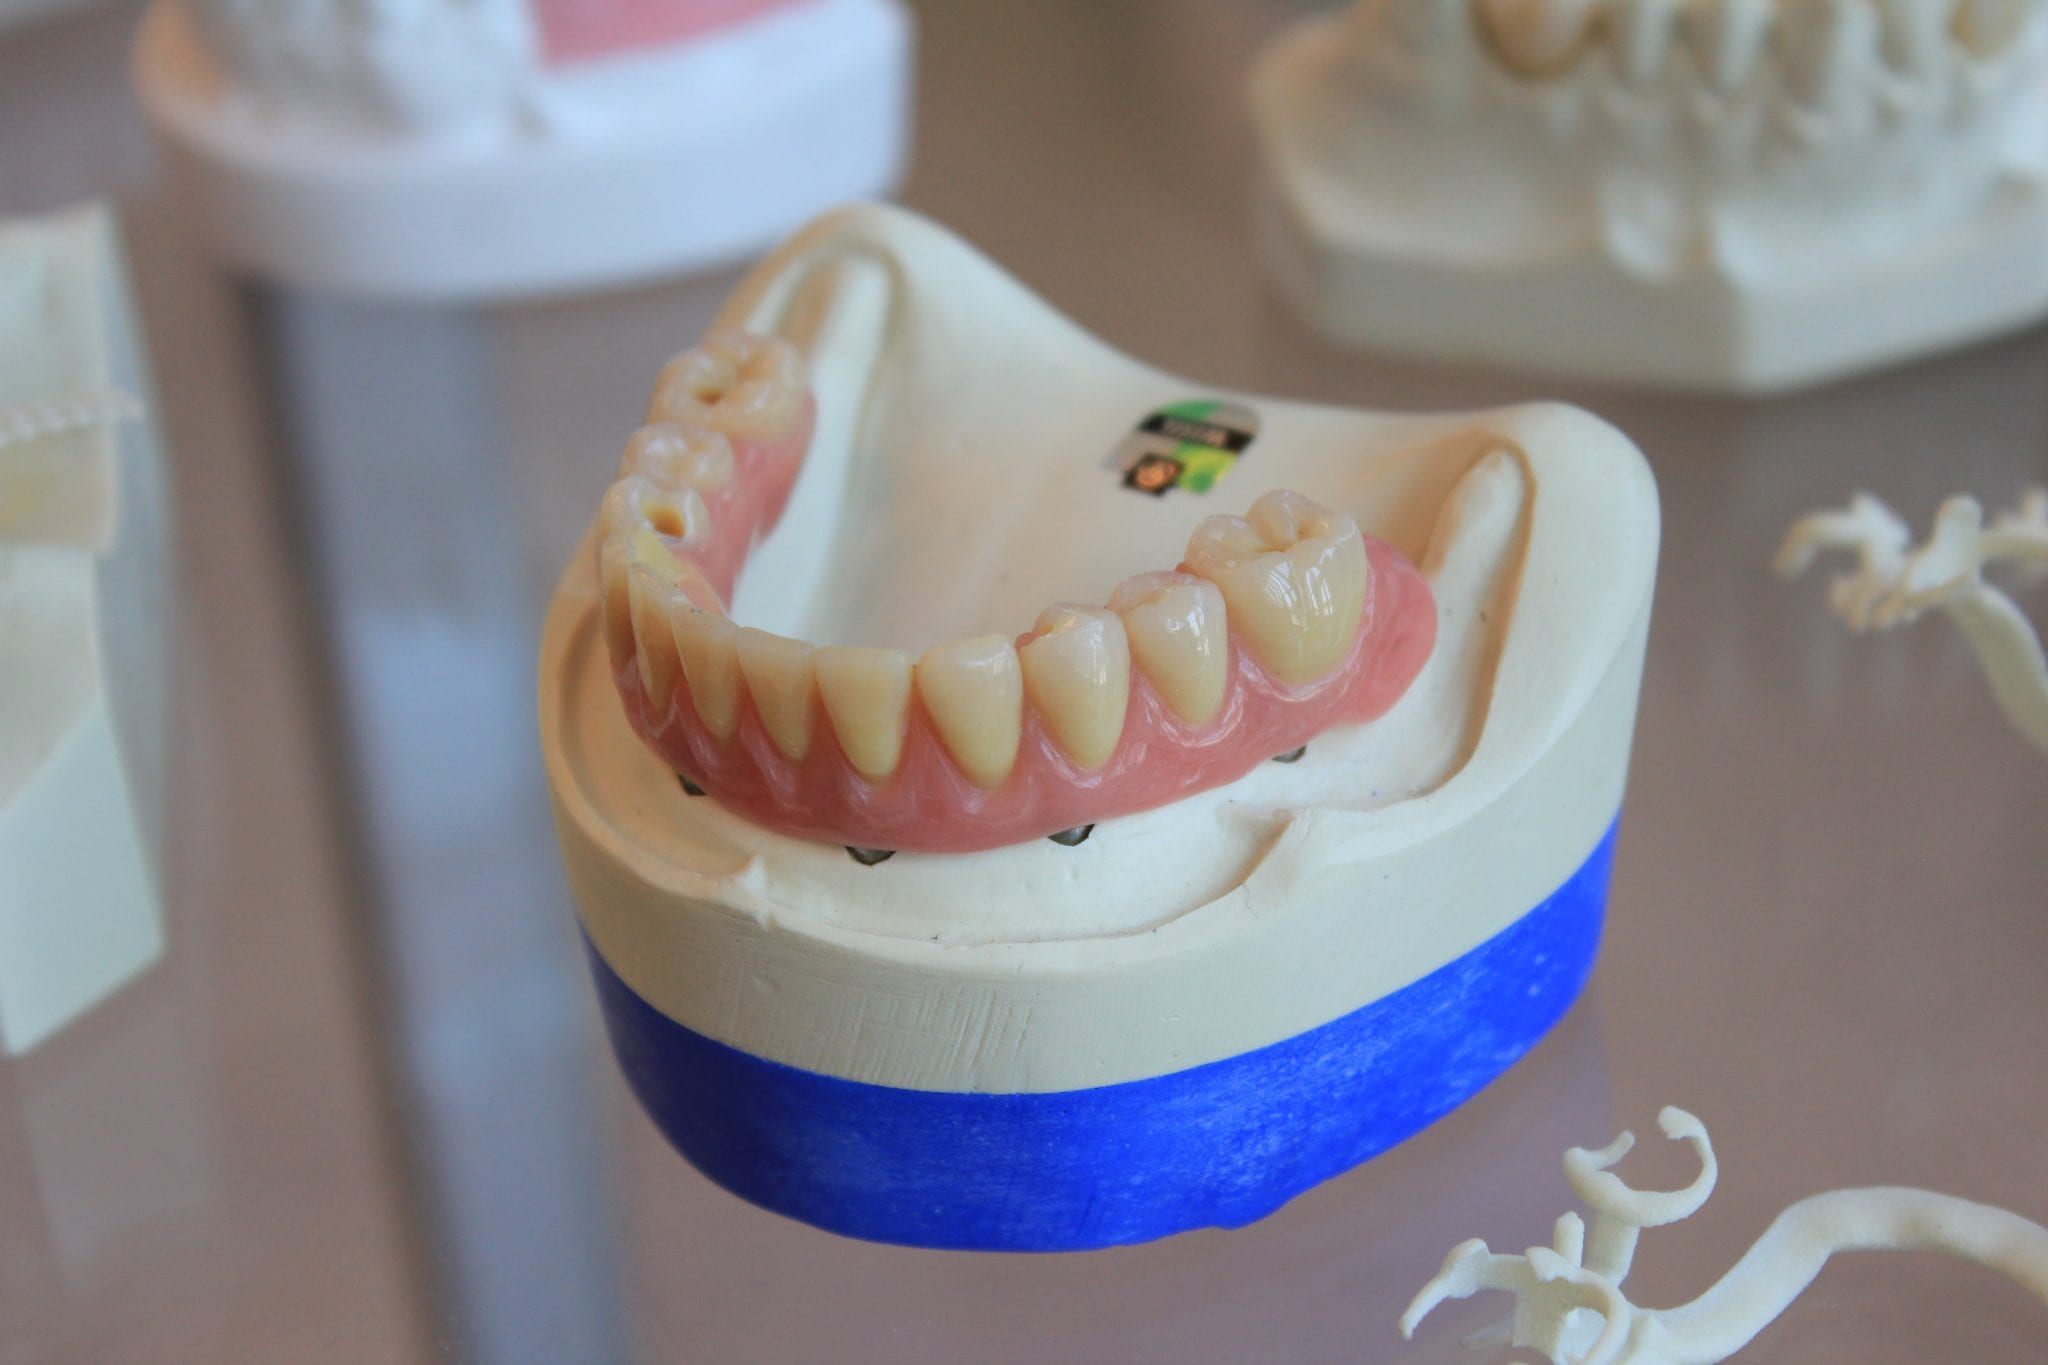 Types Of Dental Prosthetics And Their Installation Stages Dentistry Articles 6340